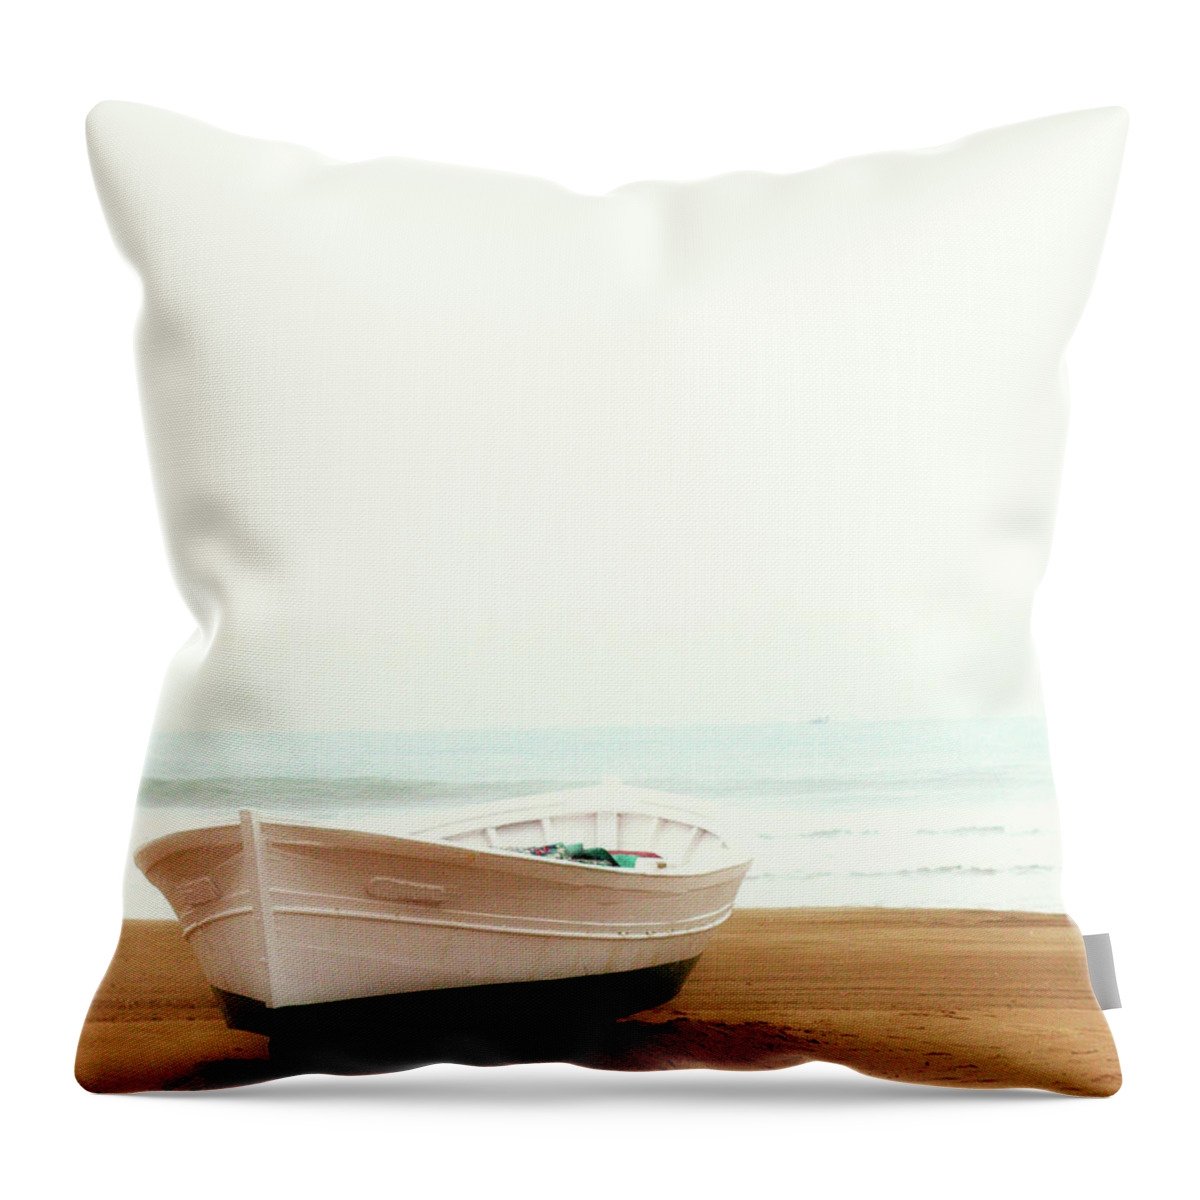 Tranquility Throw Pillow featuring the photograph The Solitude Of The Boat by Veronka & Cia